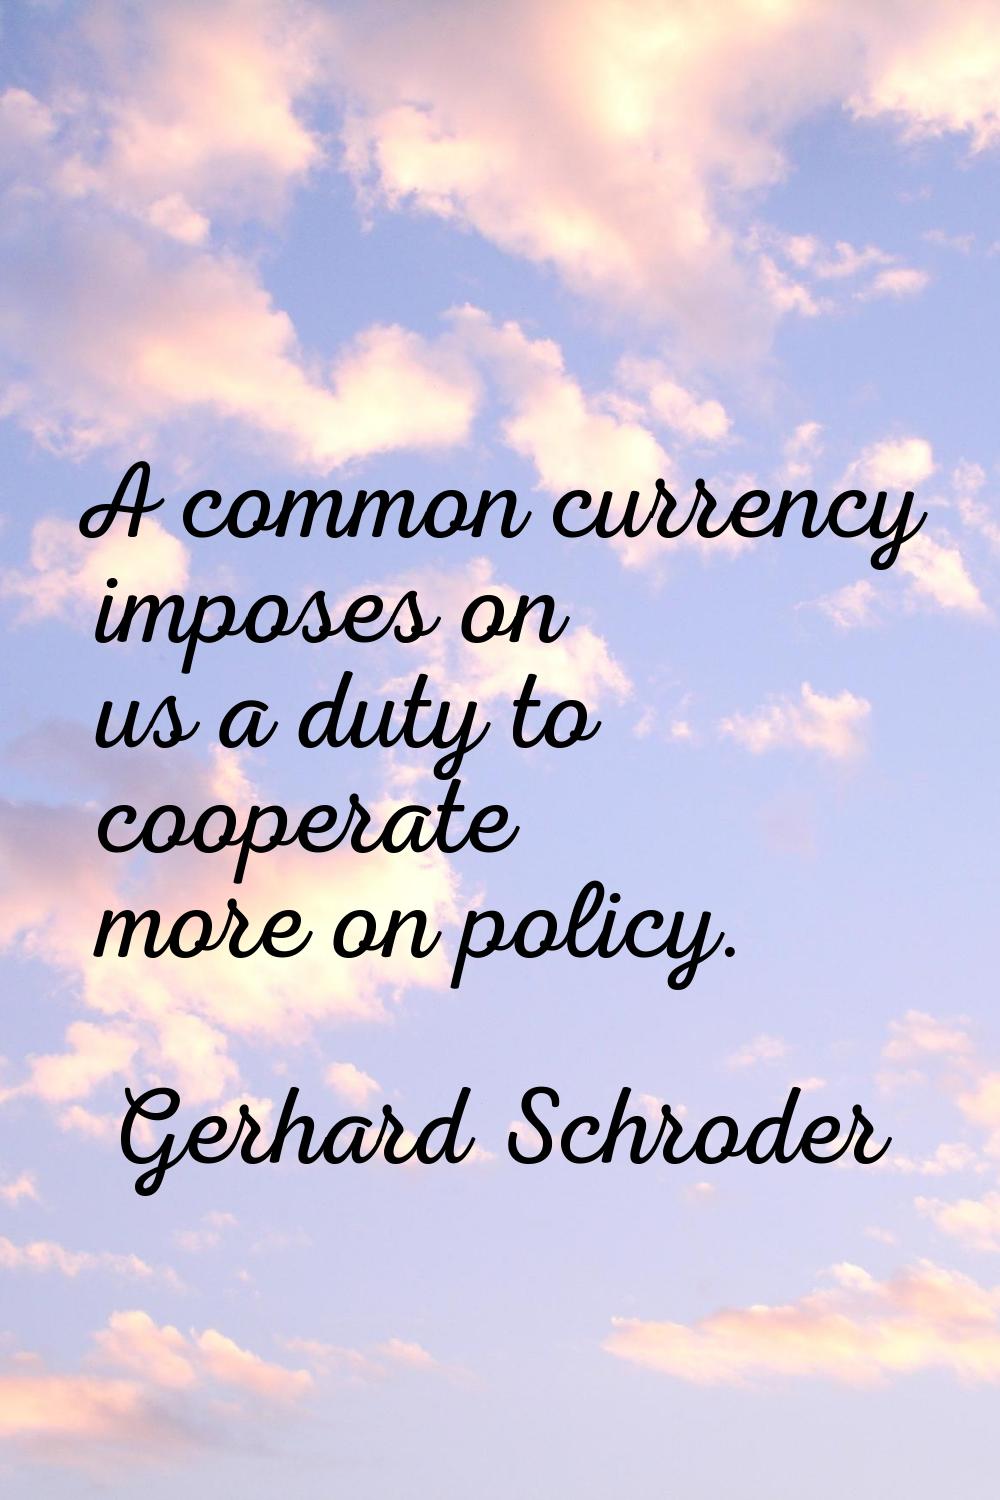 A common currency imposes on us a duty to cooperate more on policy.